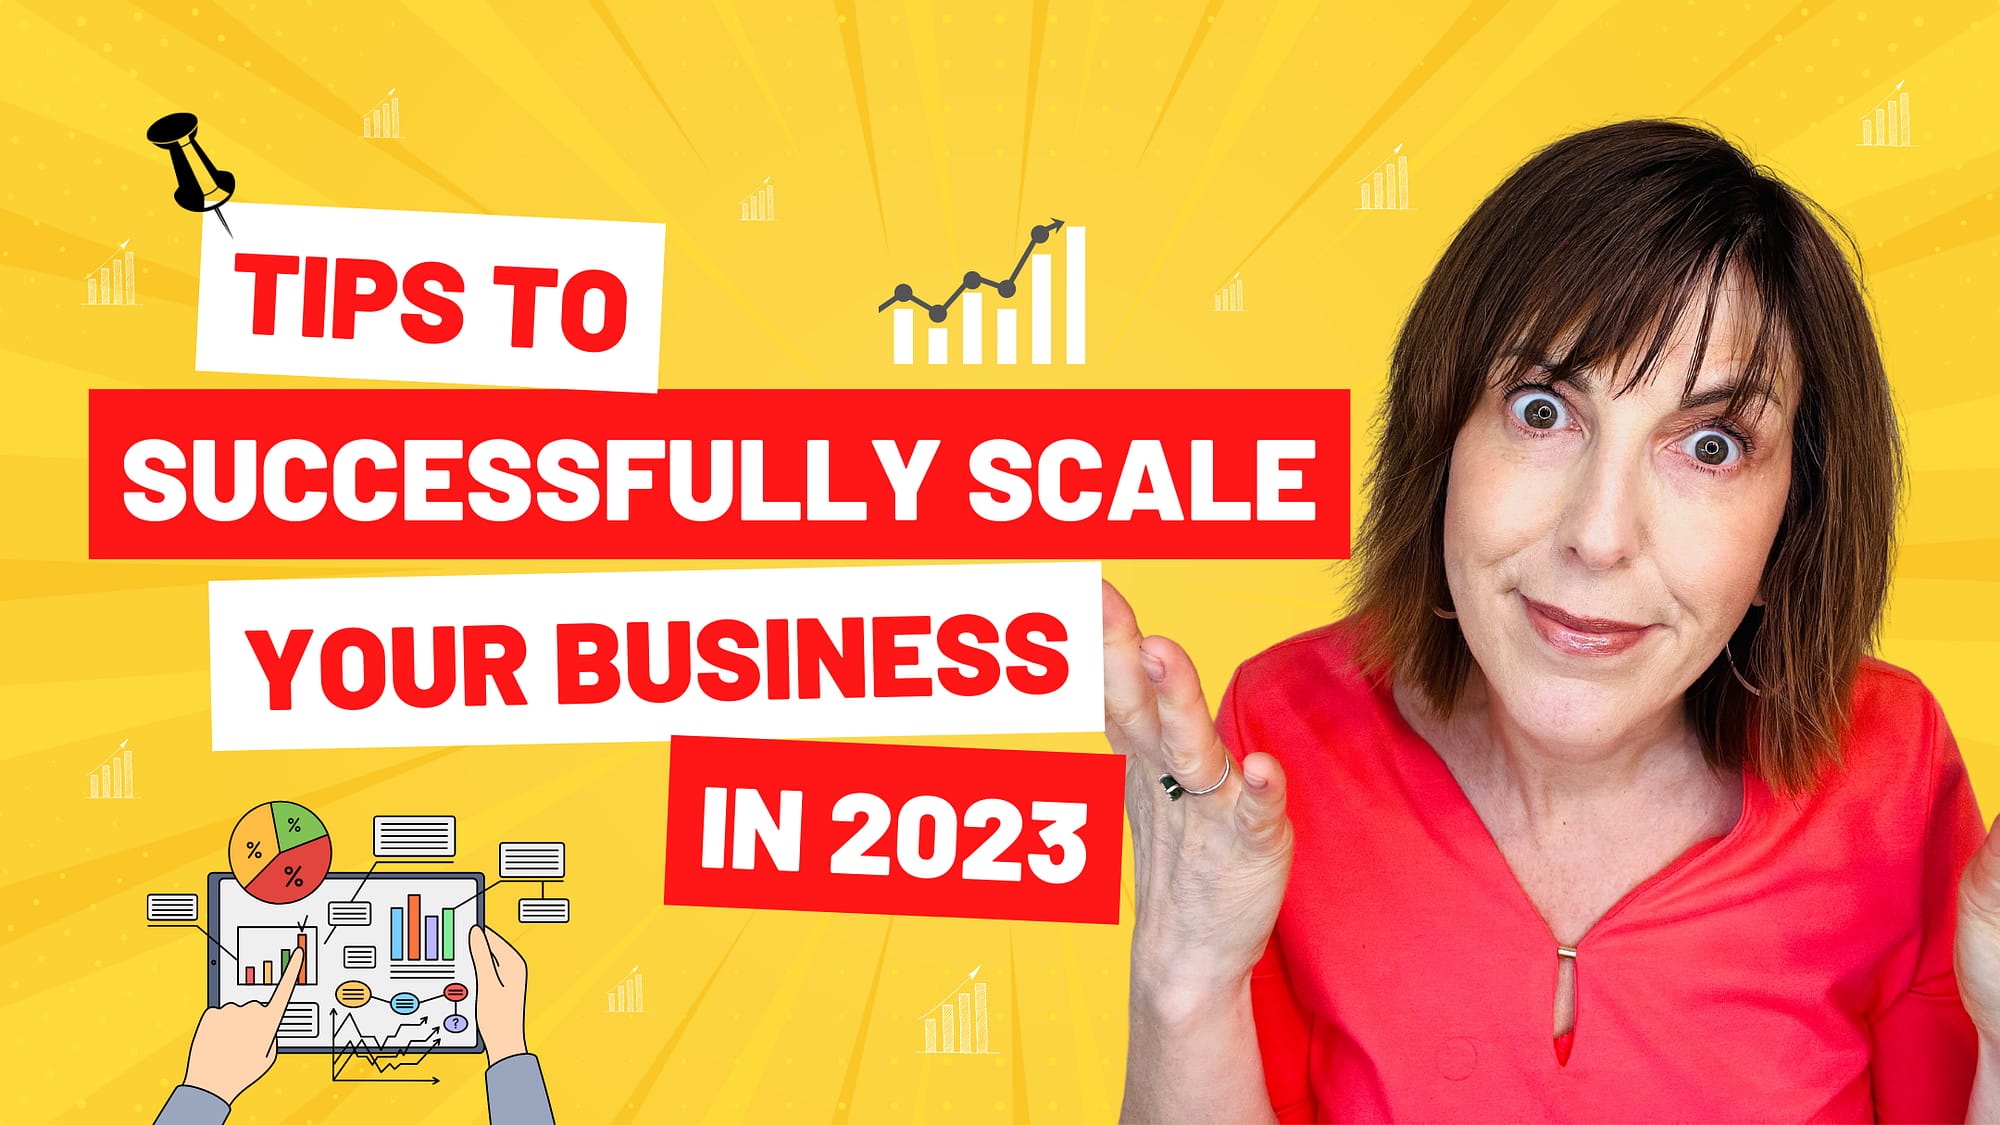 Tips to Successfully Scale Your Business in 2023